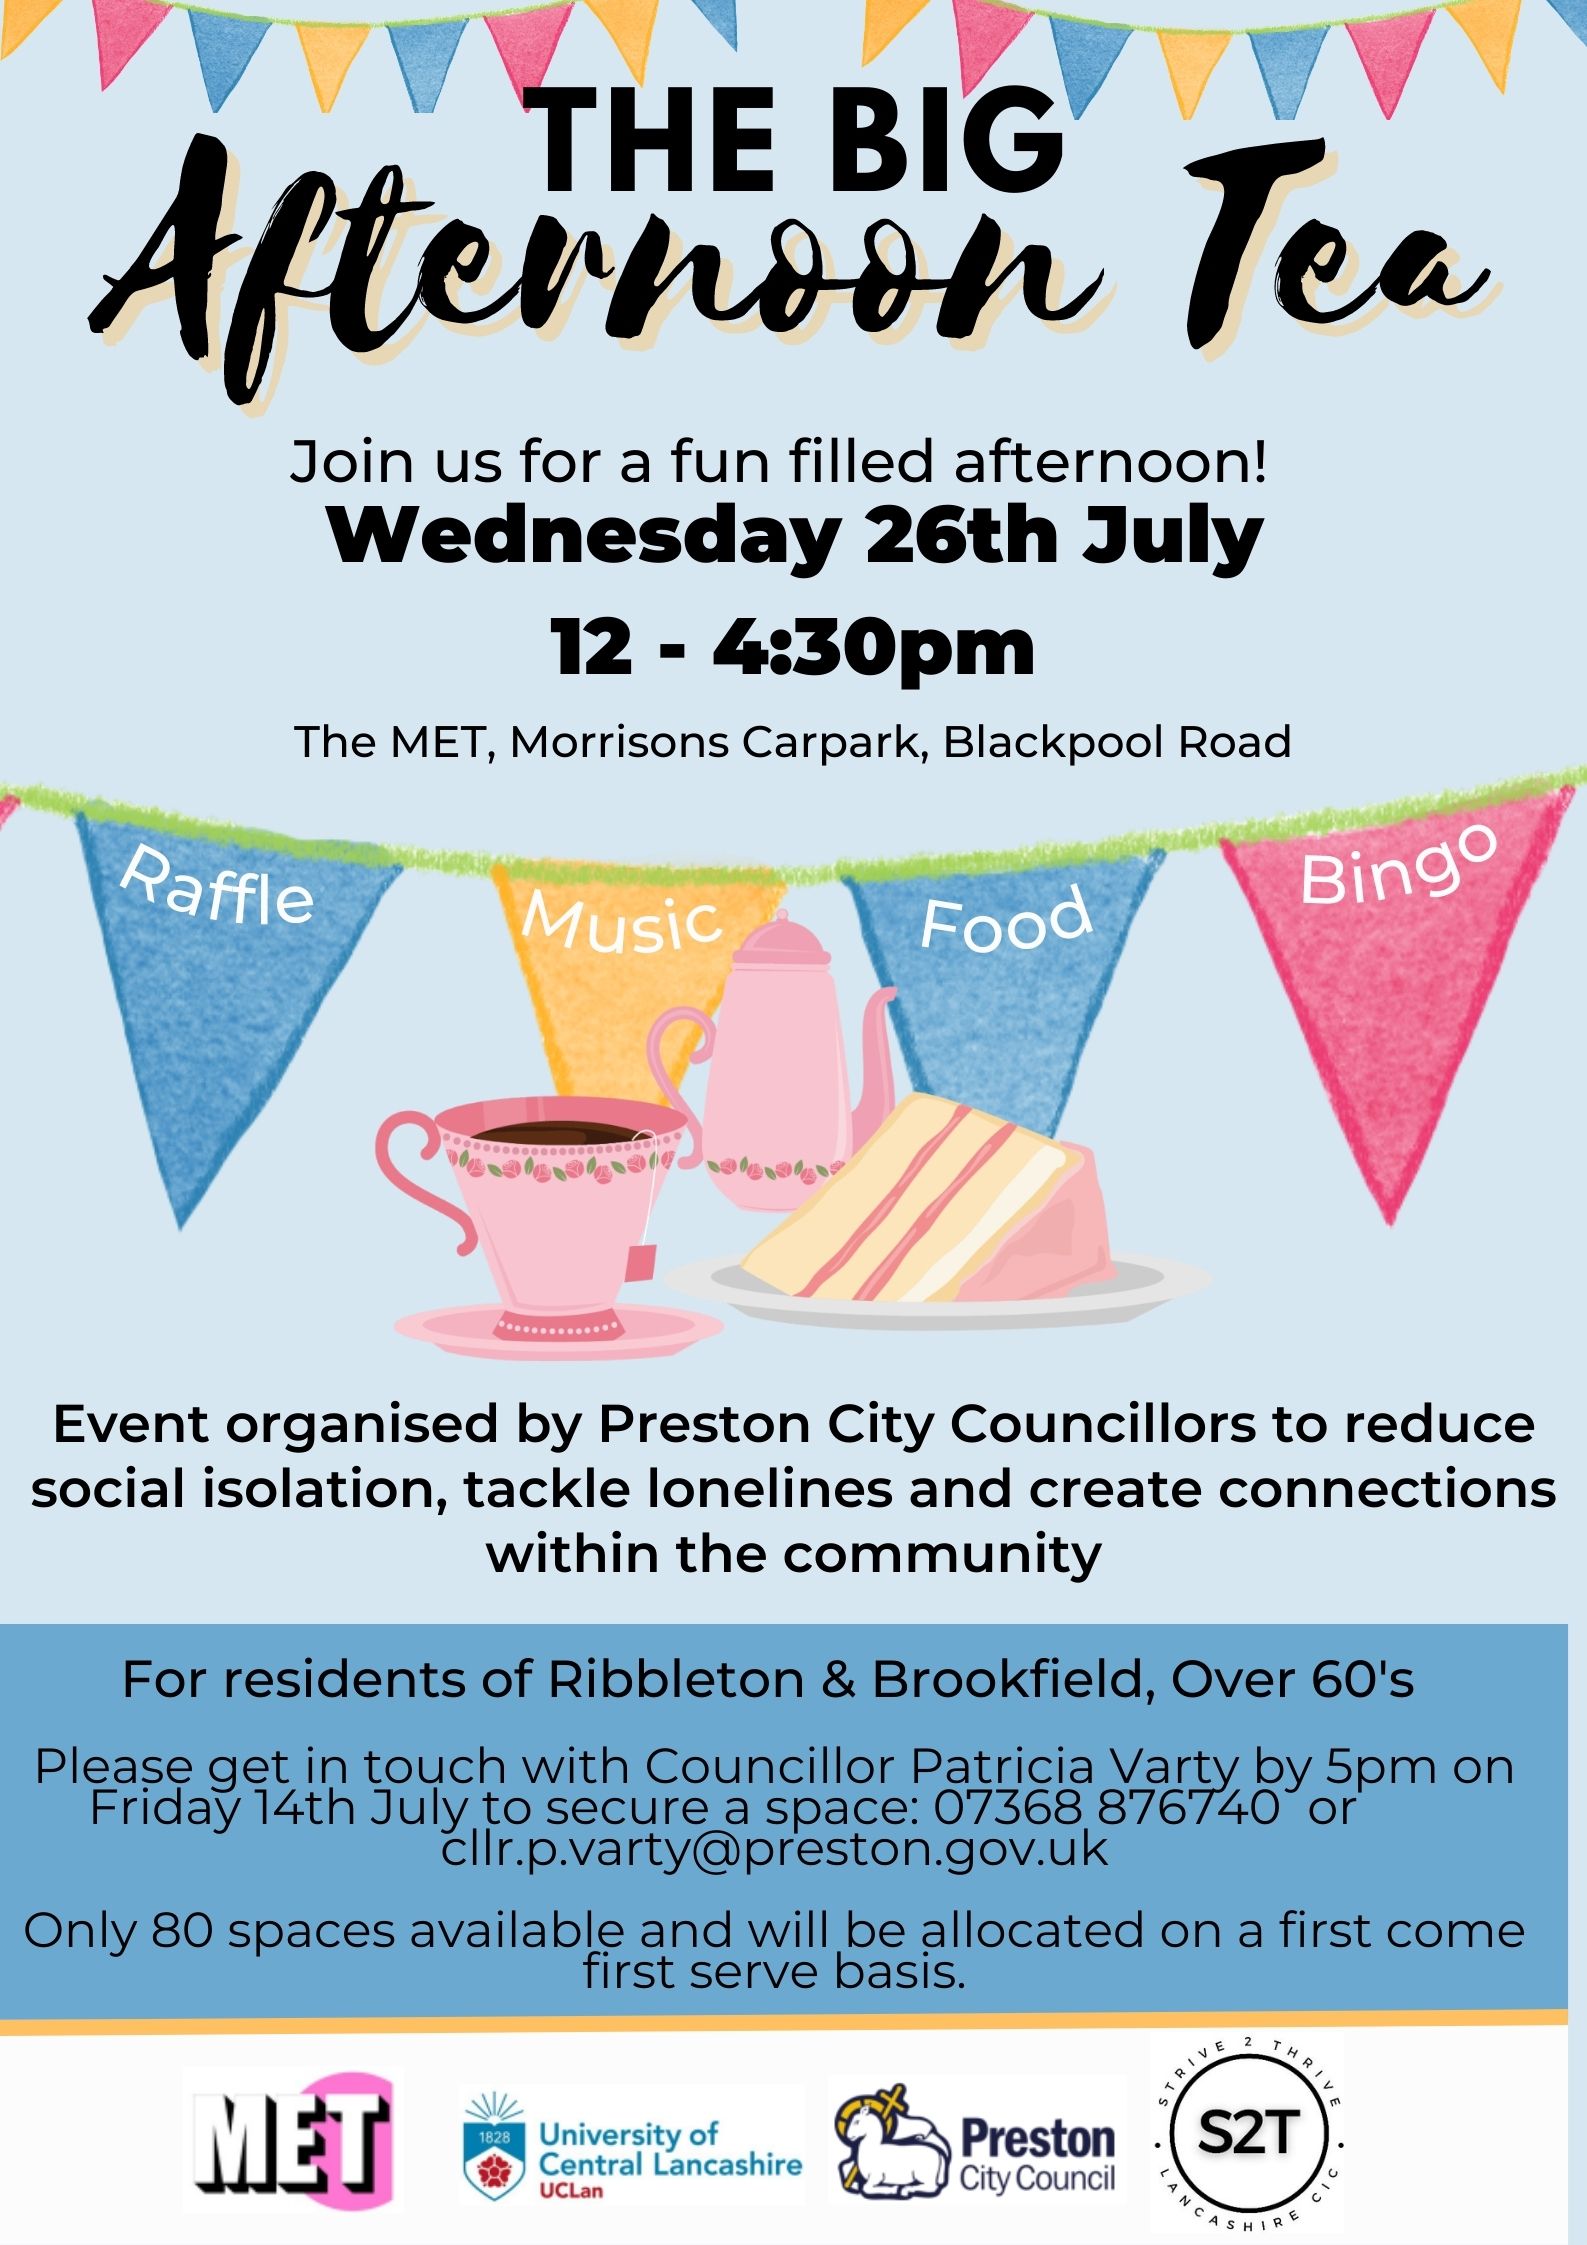 An image of a flyer for 'The Big Afternoon Tea', and afternoon tea event for over 60s in the Ribbleton and Brookfield wards of Preston